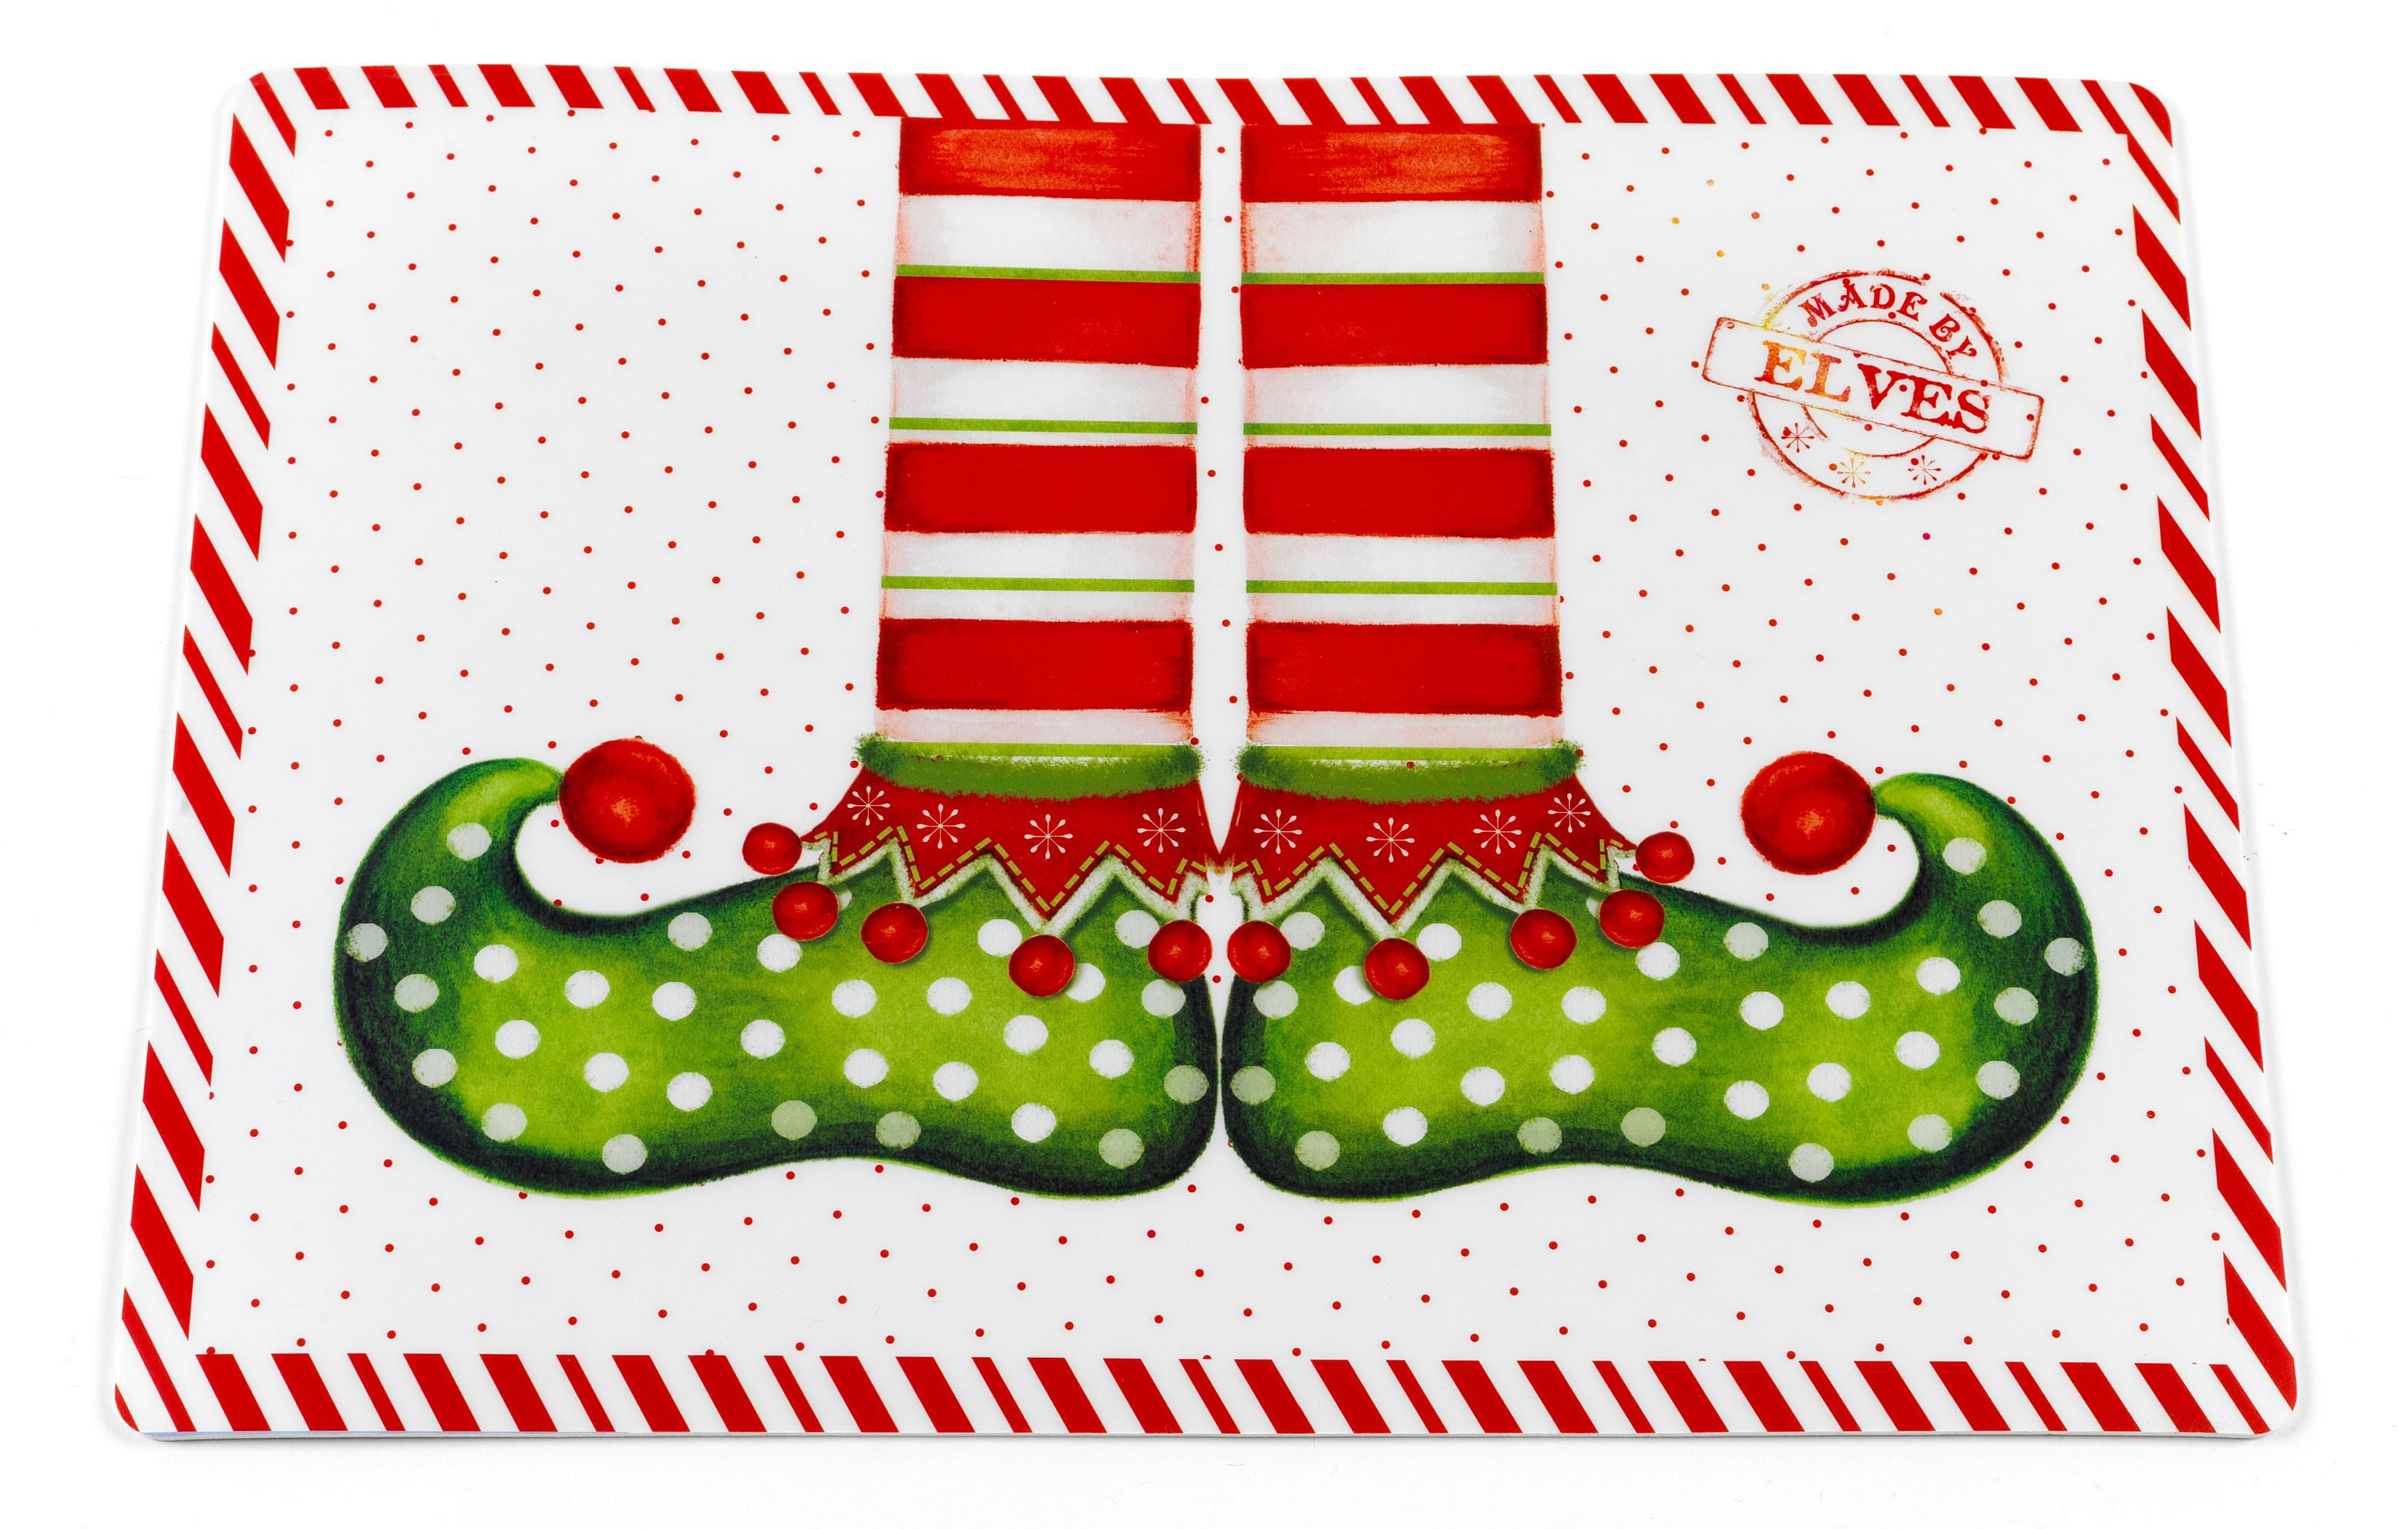 CA 2 REVERSIBLE NON CLEAR HARD PLASTIC PLACEMATS,12" x 18" CHRISTMAS ELVES 